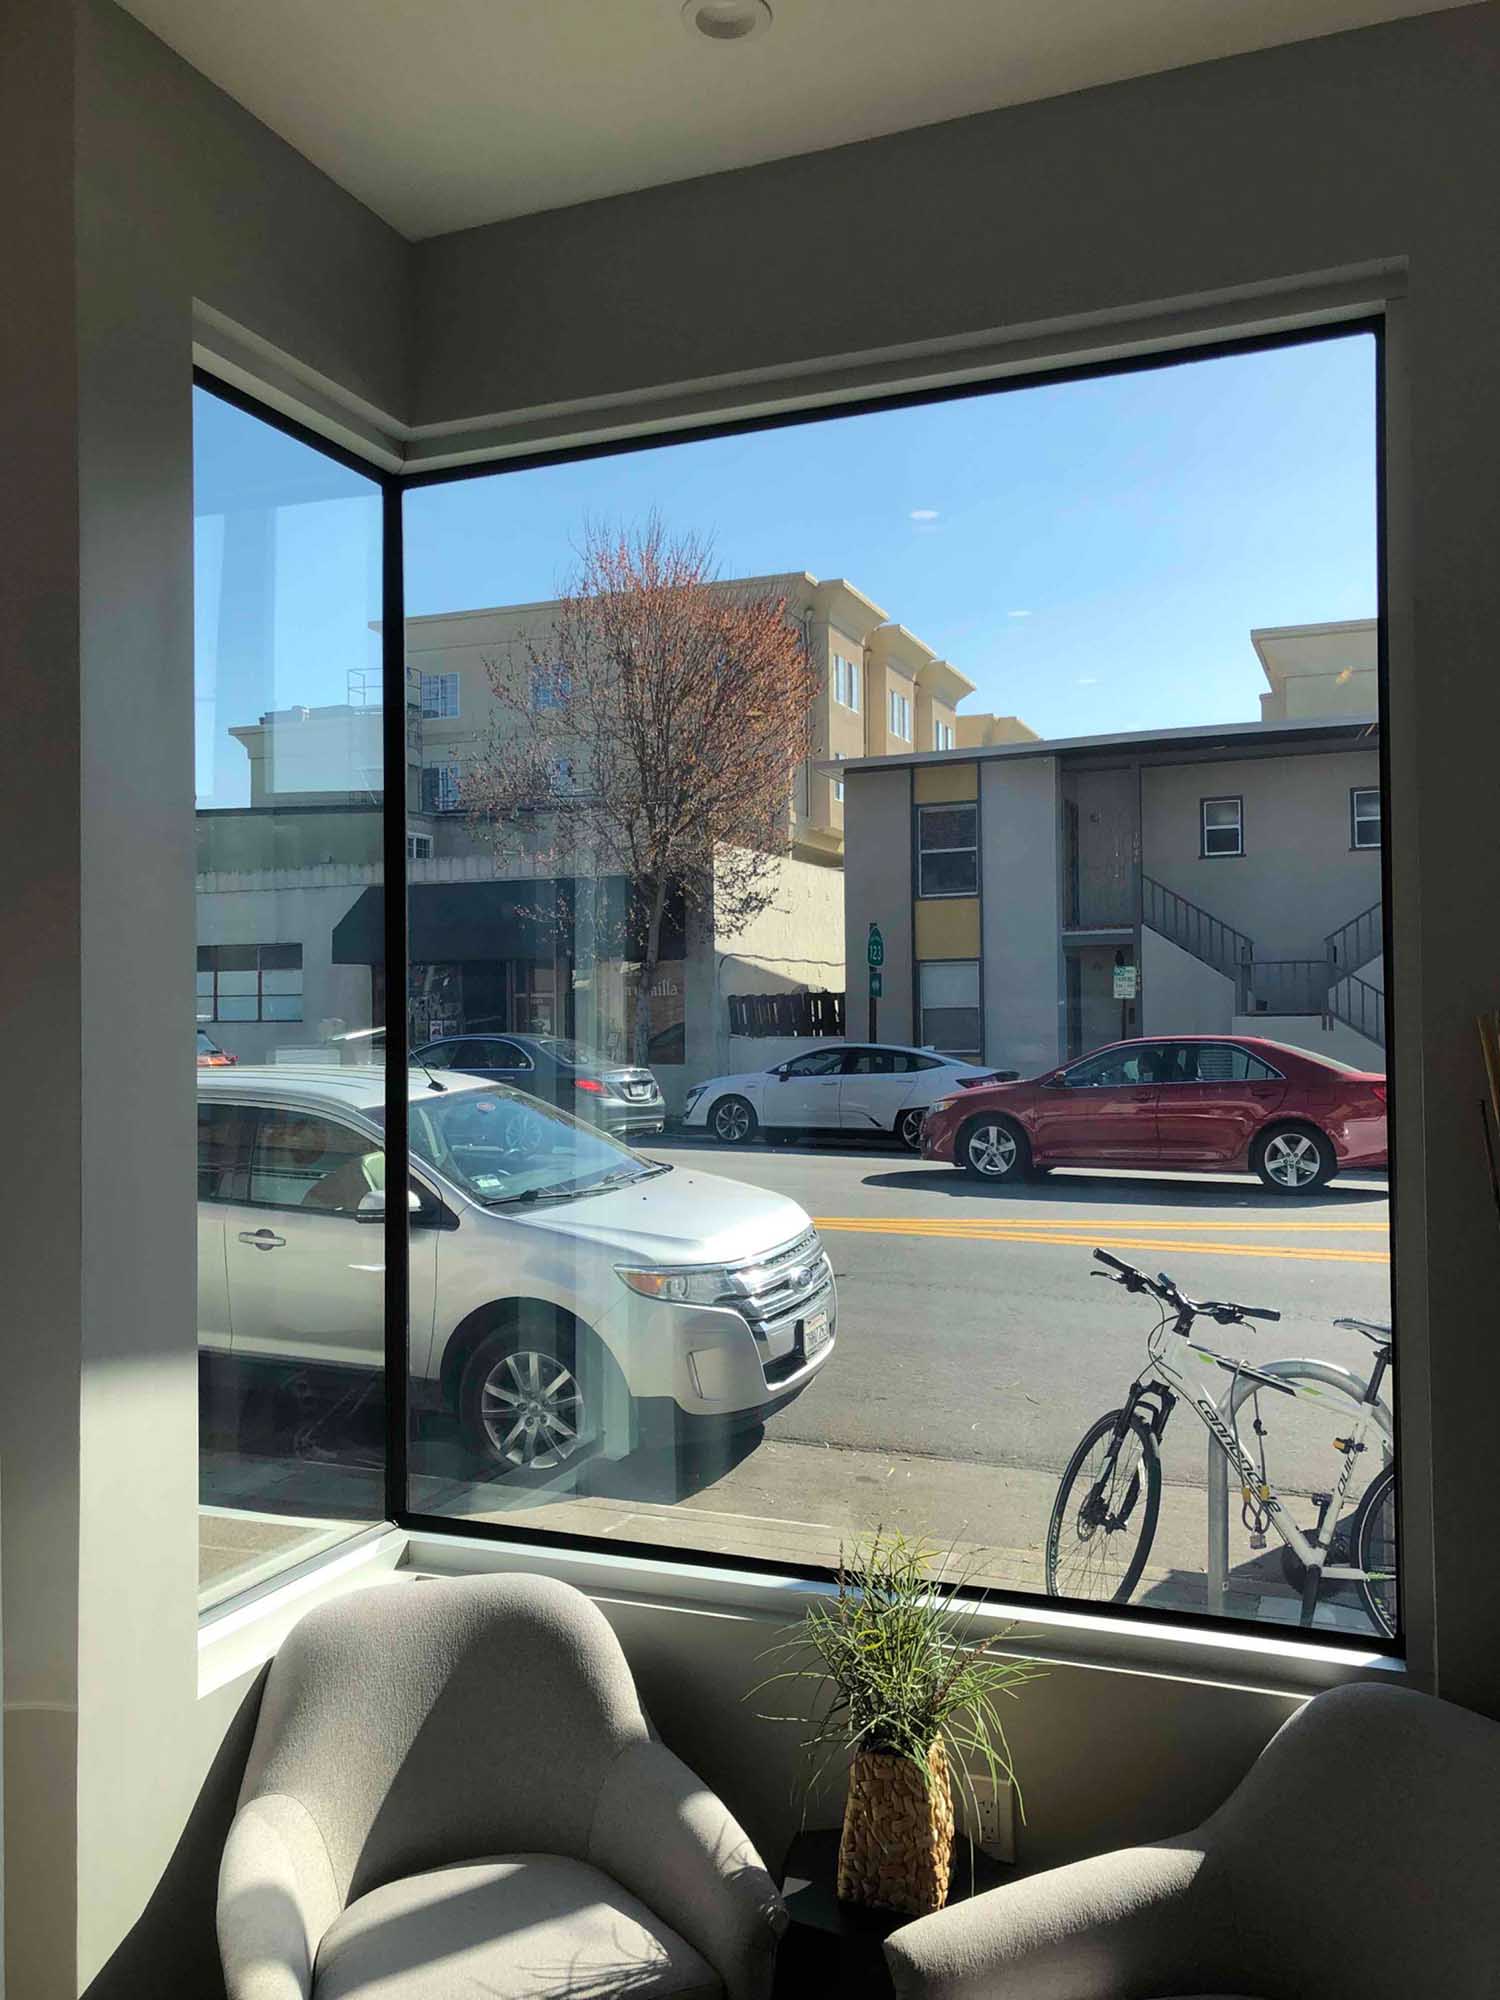 Add 3M Window Film to your Solano, Ave shop with ClimatePro. Get a free estimate in the San Francisco Bay Area.